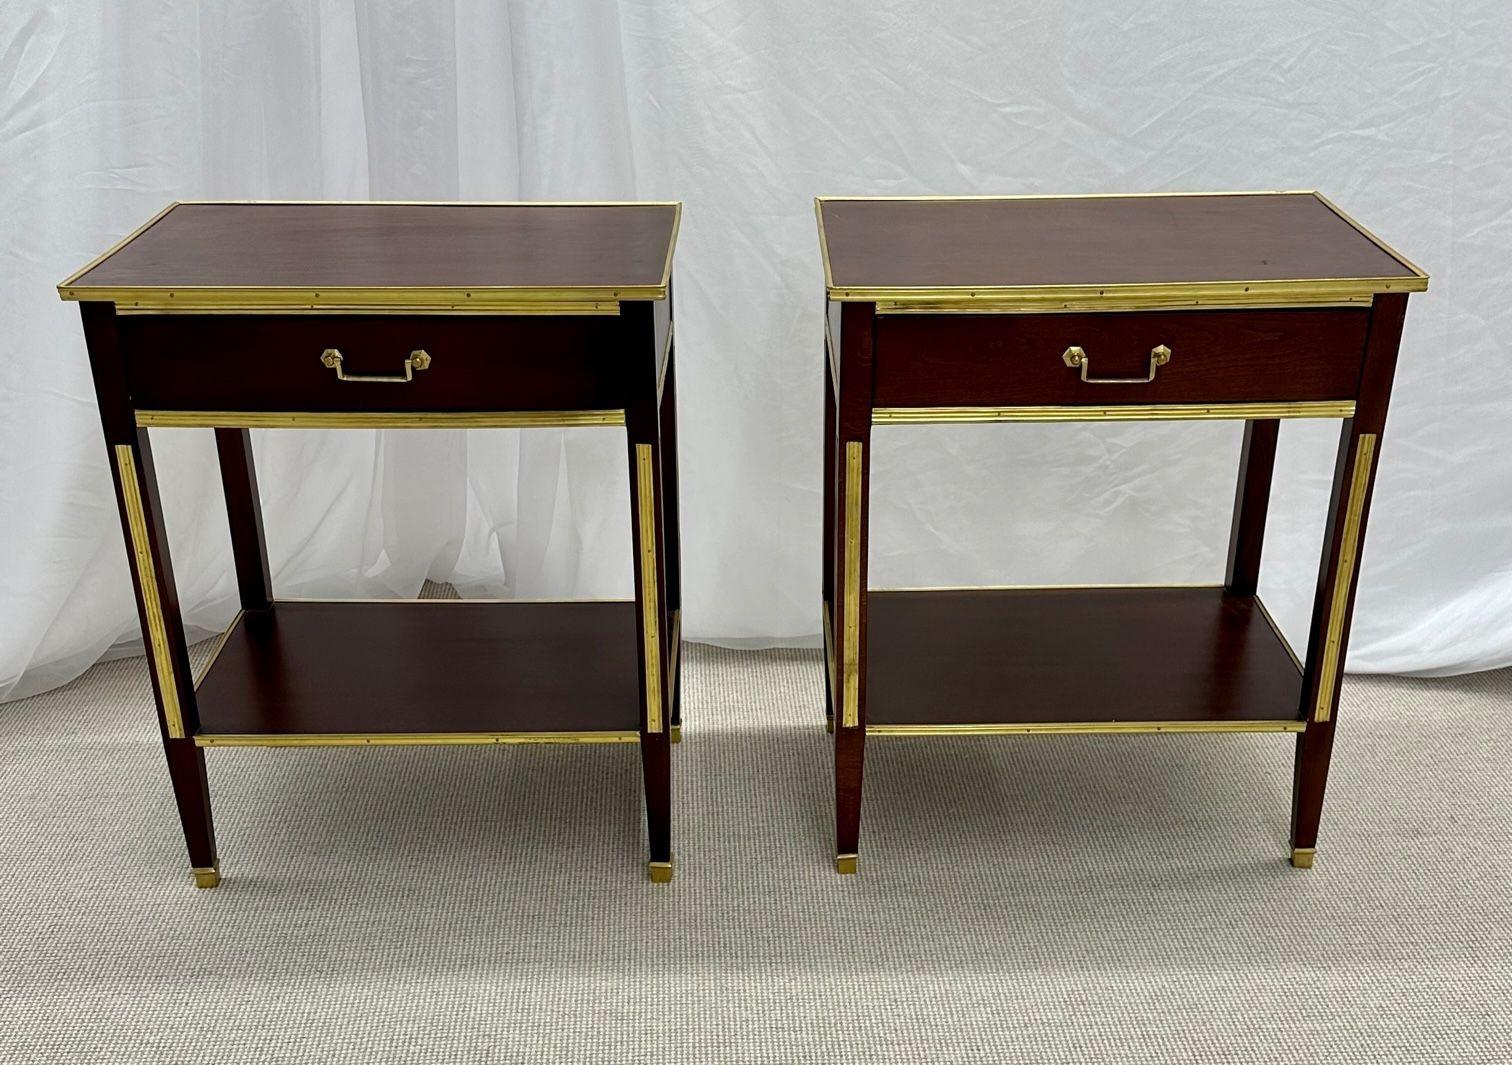 Pair of One Drawer Neoclassical Style Bronze-Mounted Mahogany End / Side Tables

A pair of one drawer Russian style bronze-mounted end tables or night stands that have been professionally refurbished. Of Russian inspiration, these tables are